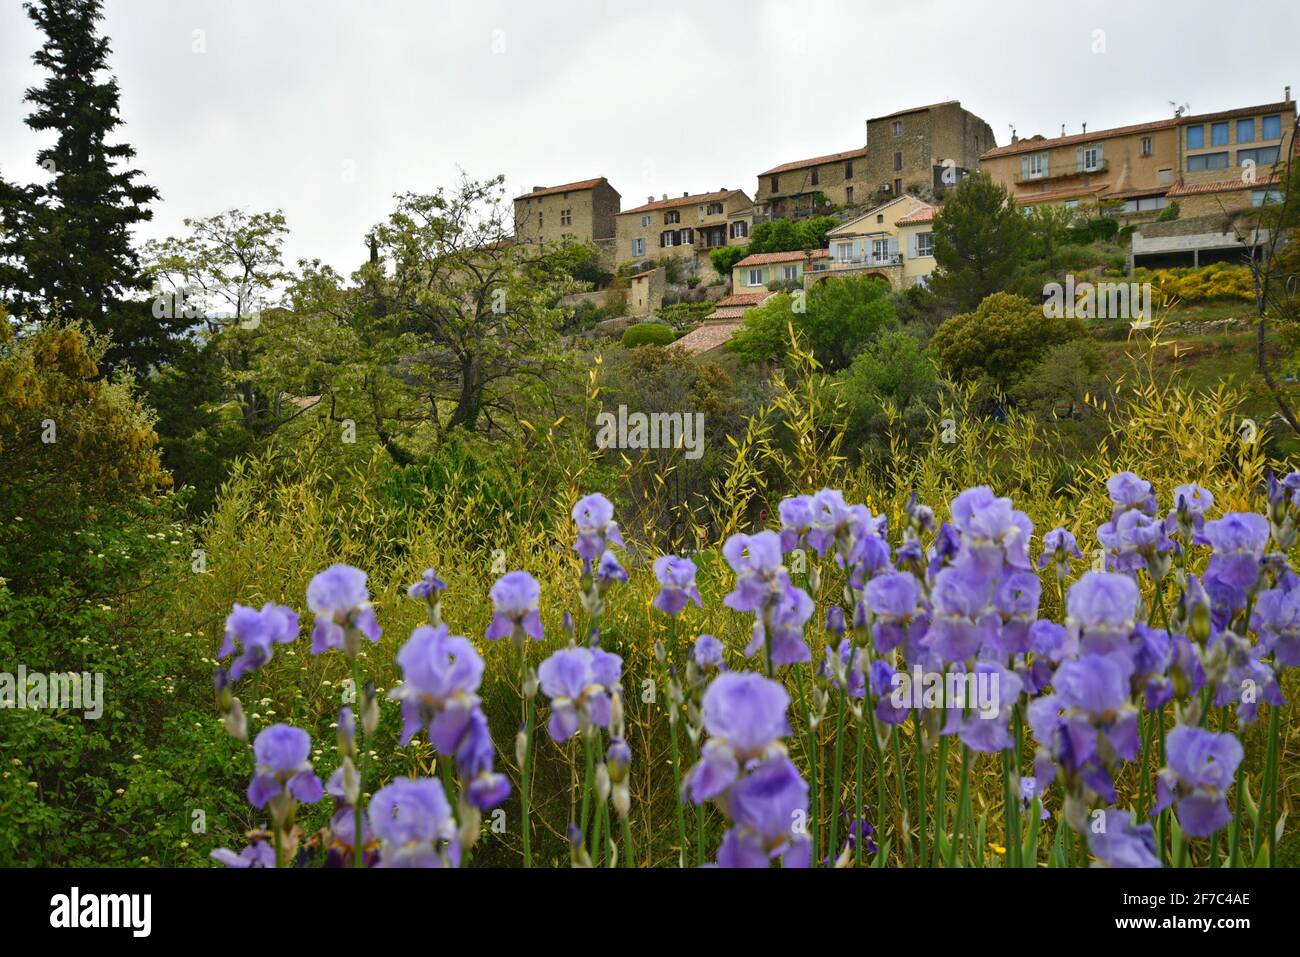 Landscape with scenic view of Grambois a picturesque village with Provençal architecture in Provence-Alpes-Côte d'Azur, Vaucluse, France. Stock Photo